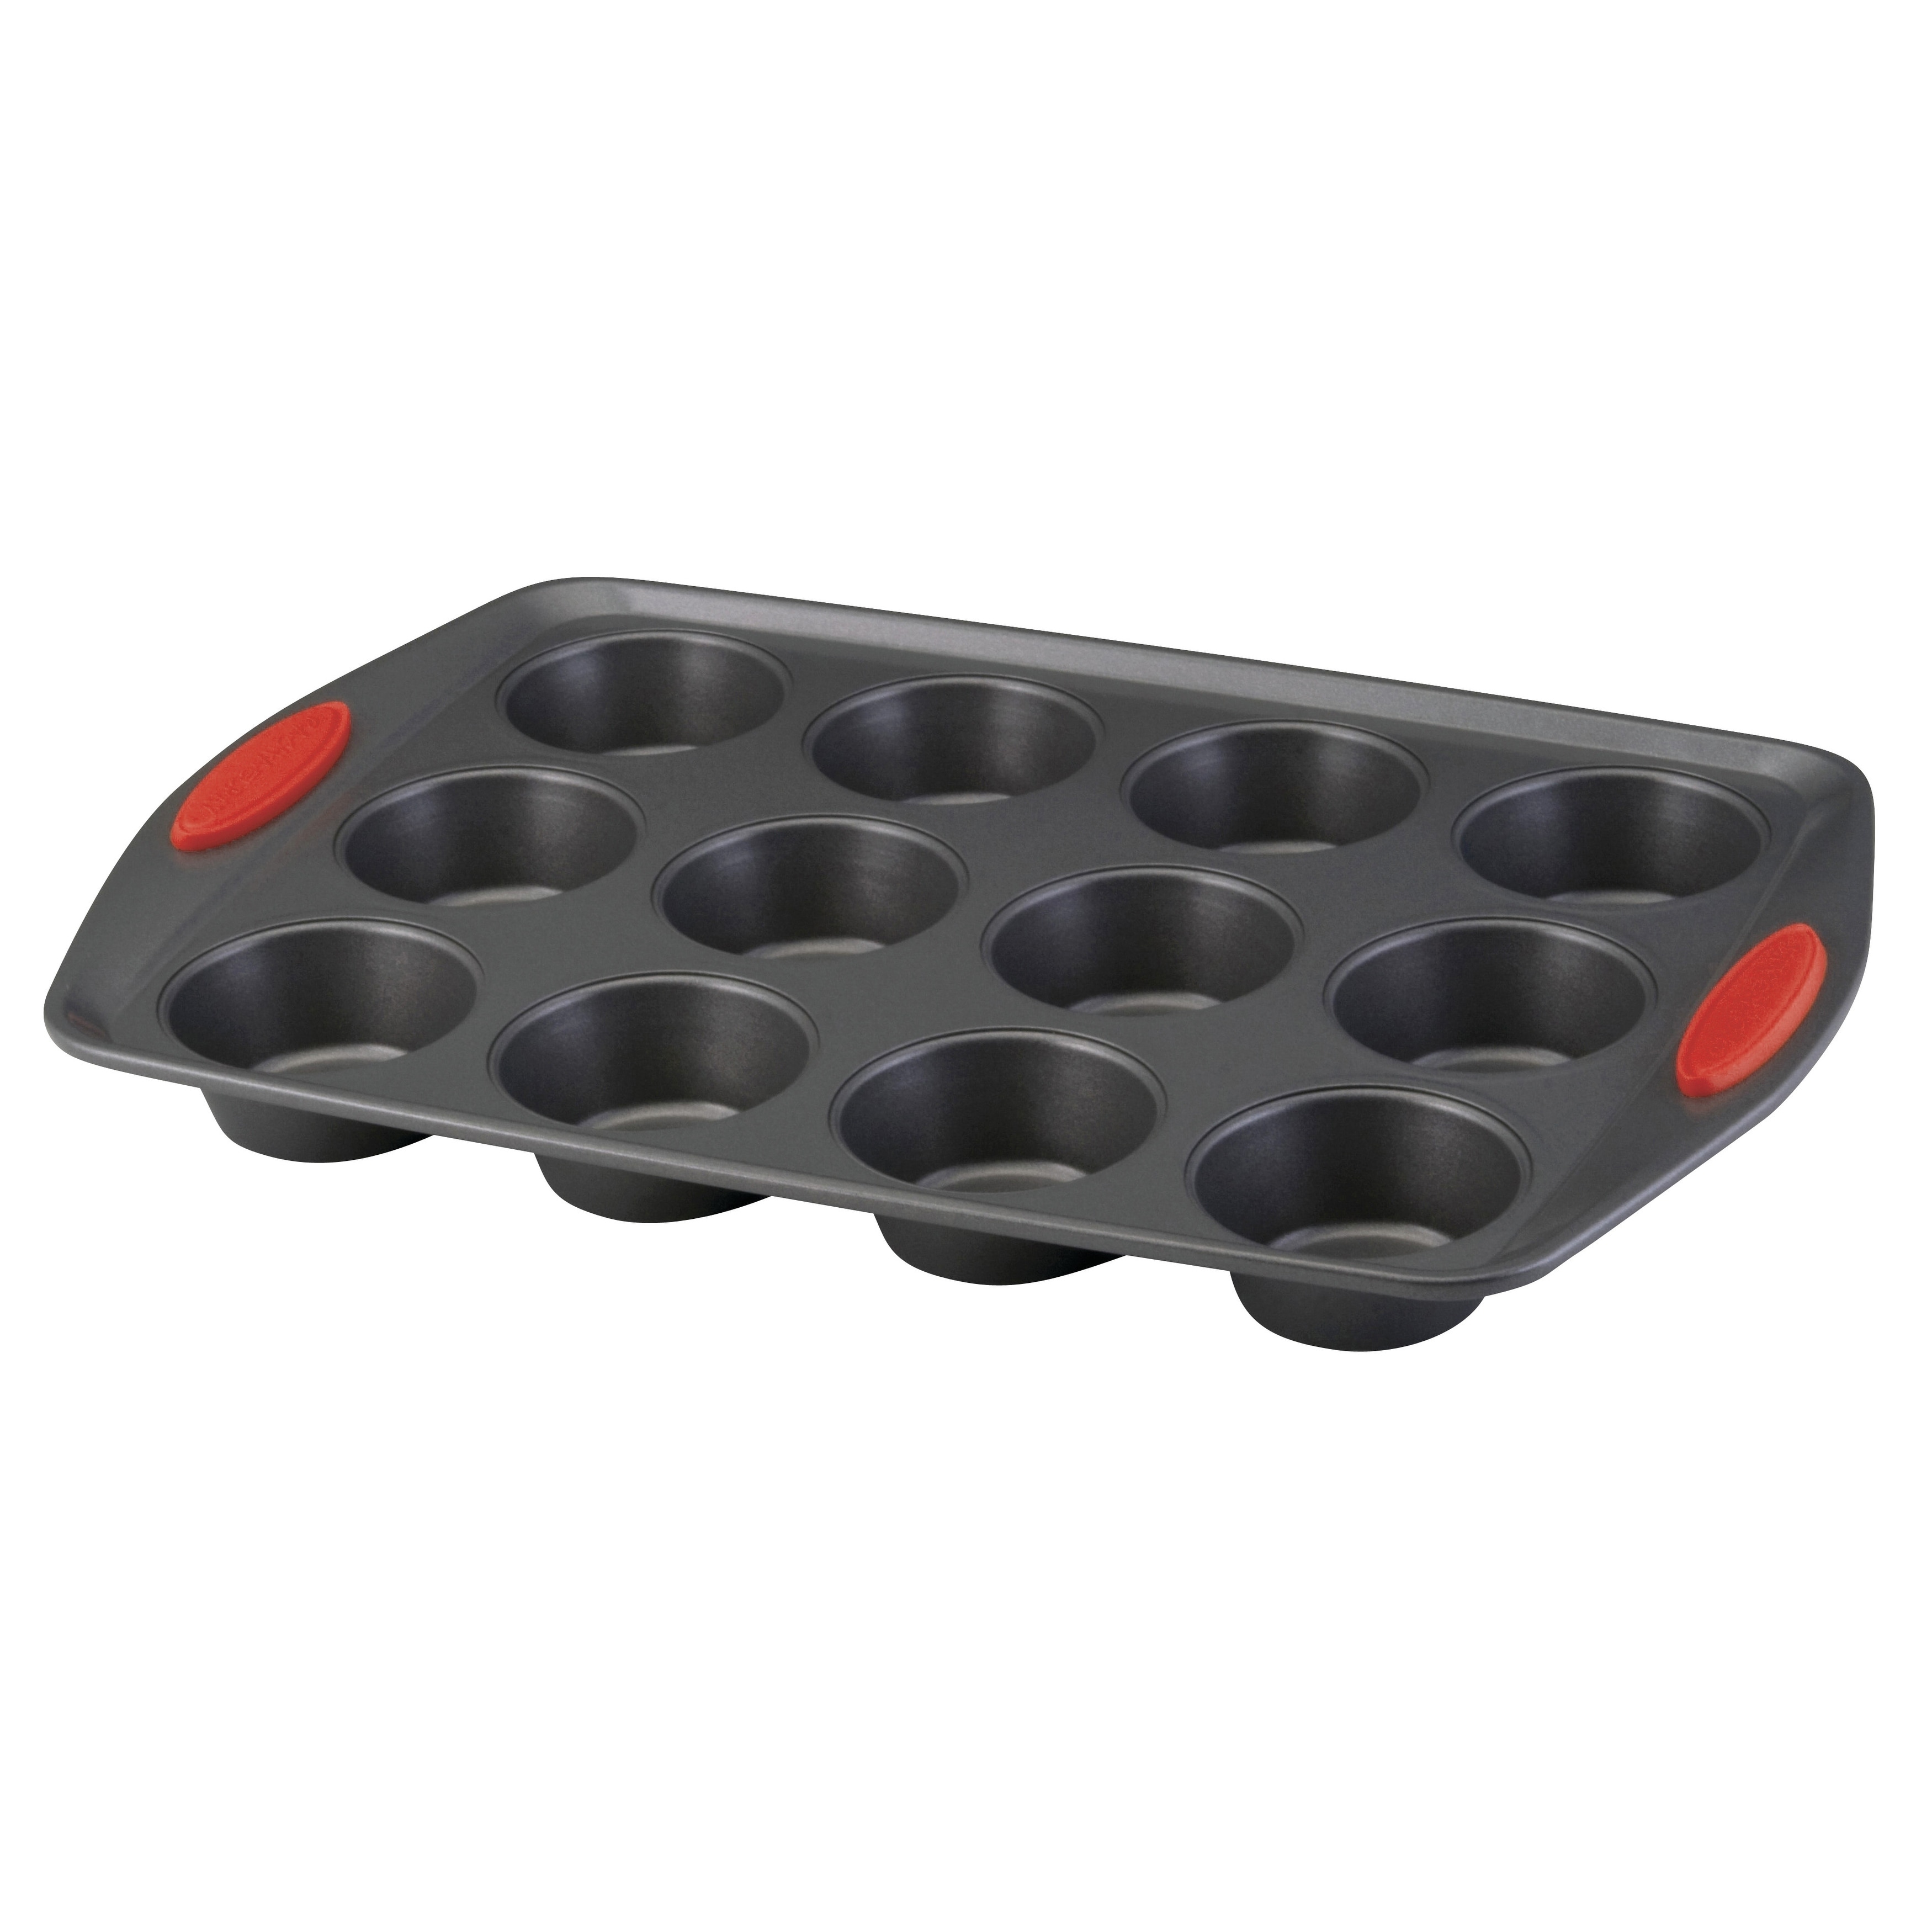 https://ak1.ostkcdn.com/images/products/29067694/Rachael-Ray-Yum-o-Nonstick-Bakeware-12-Cup-Muffin-and-Cupcake-Pan-0074581a-6795-41af-90b3-1ad6701674b0.jpg